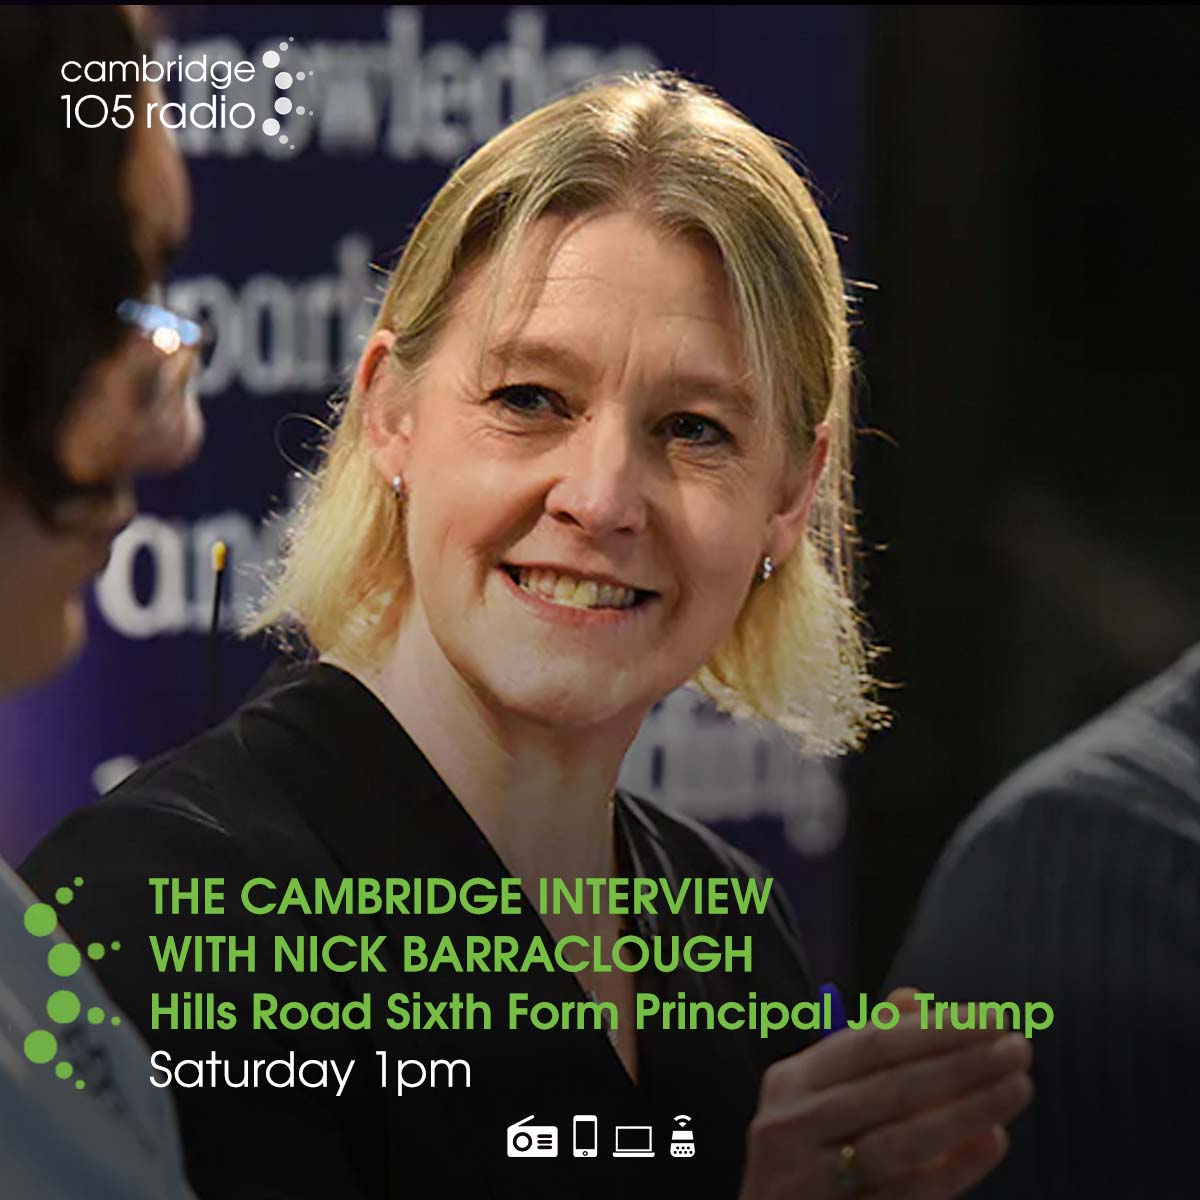 Jo Trump is responsible for one of the most consistently successful sixth-form colleges in the country. She tells Nick about her own education, time out in Africa, staring at college with over 2,000 students through lockdown. Saturday at 1pm and Online. @HillsRoadNews